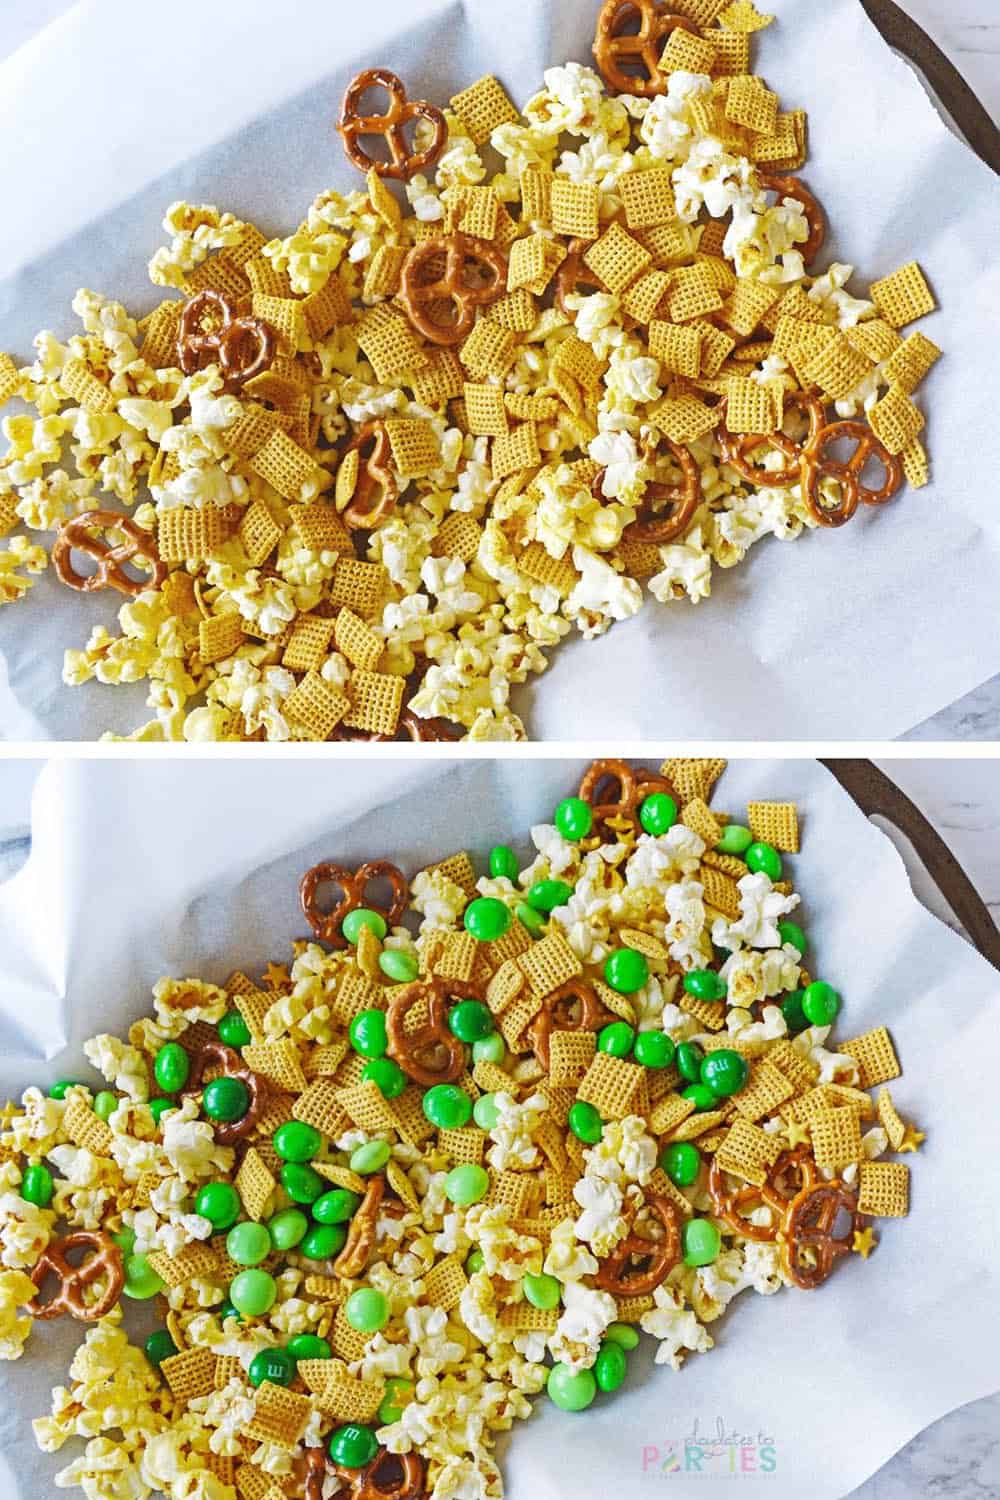 Combining ingredients for St. Patrick's Day snack mix.